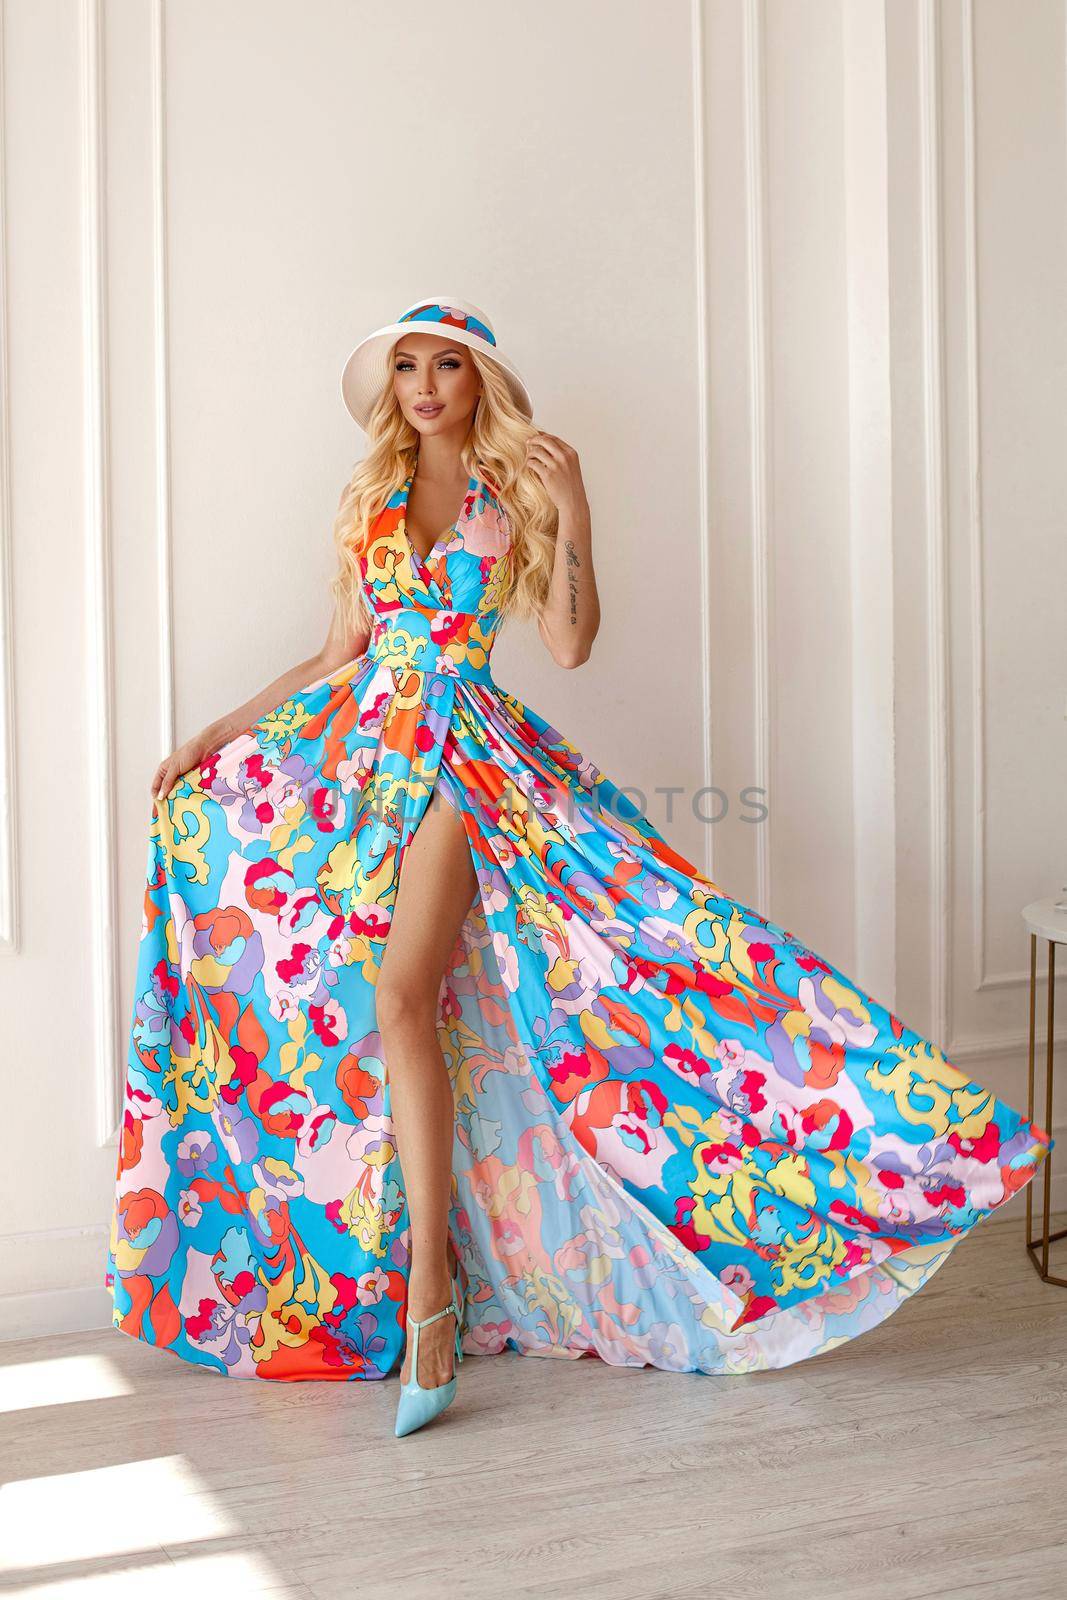 A beautiful sweet blonde woman in a bright outfit, a long skirt with a flower print, wavy hair,studio